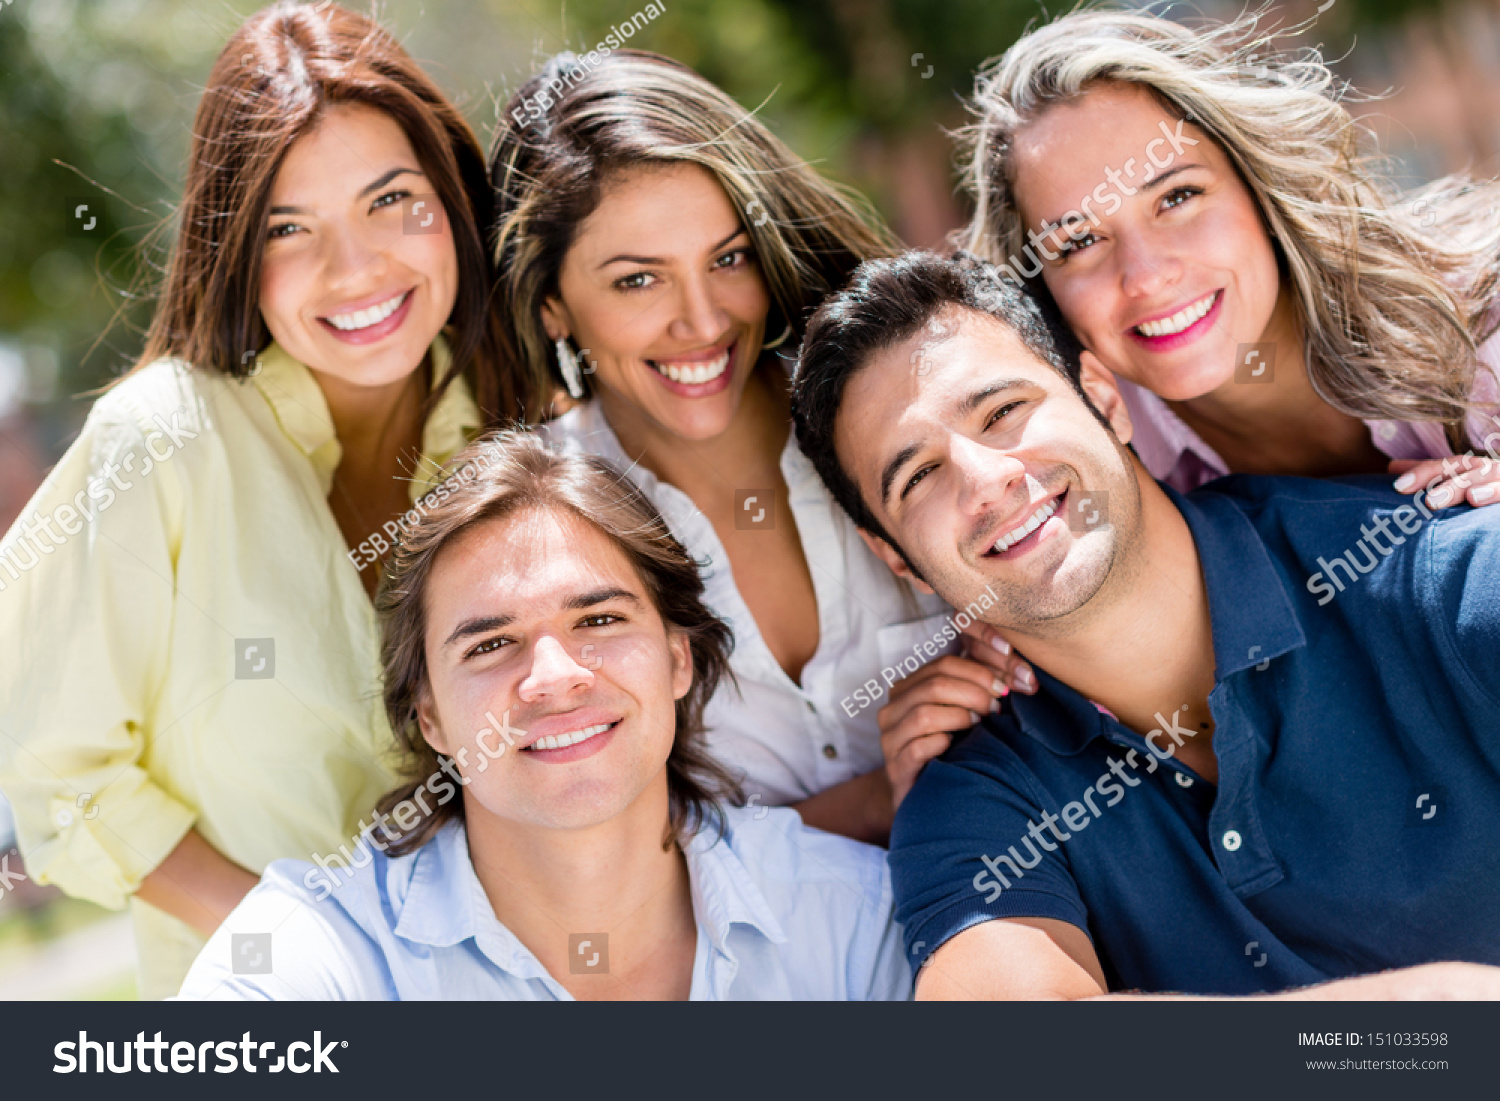 group of people smiling outside